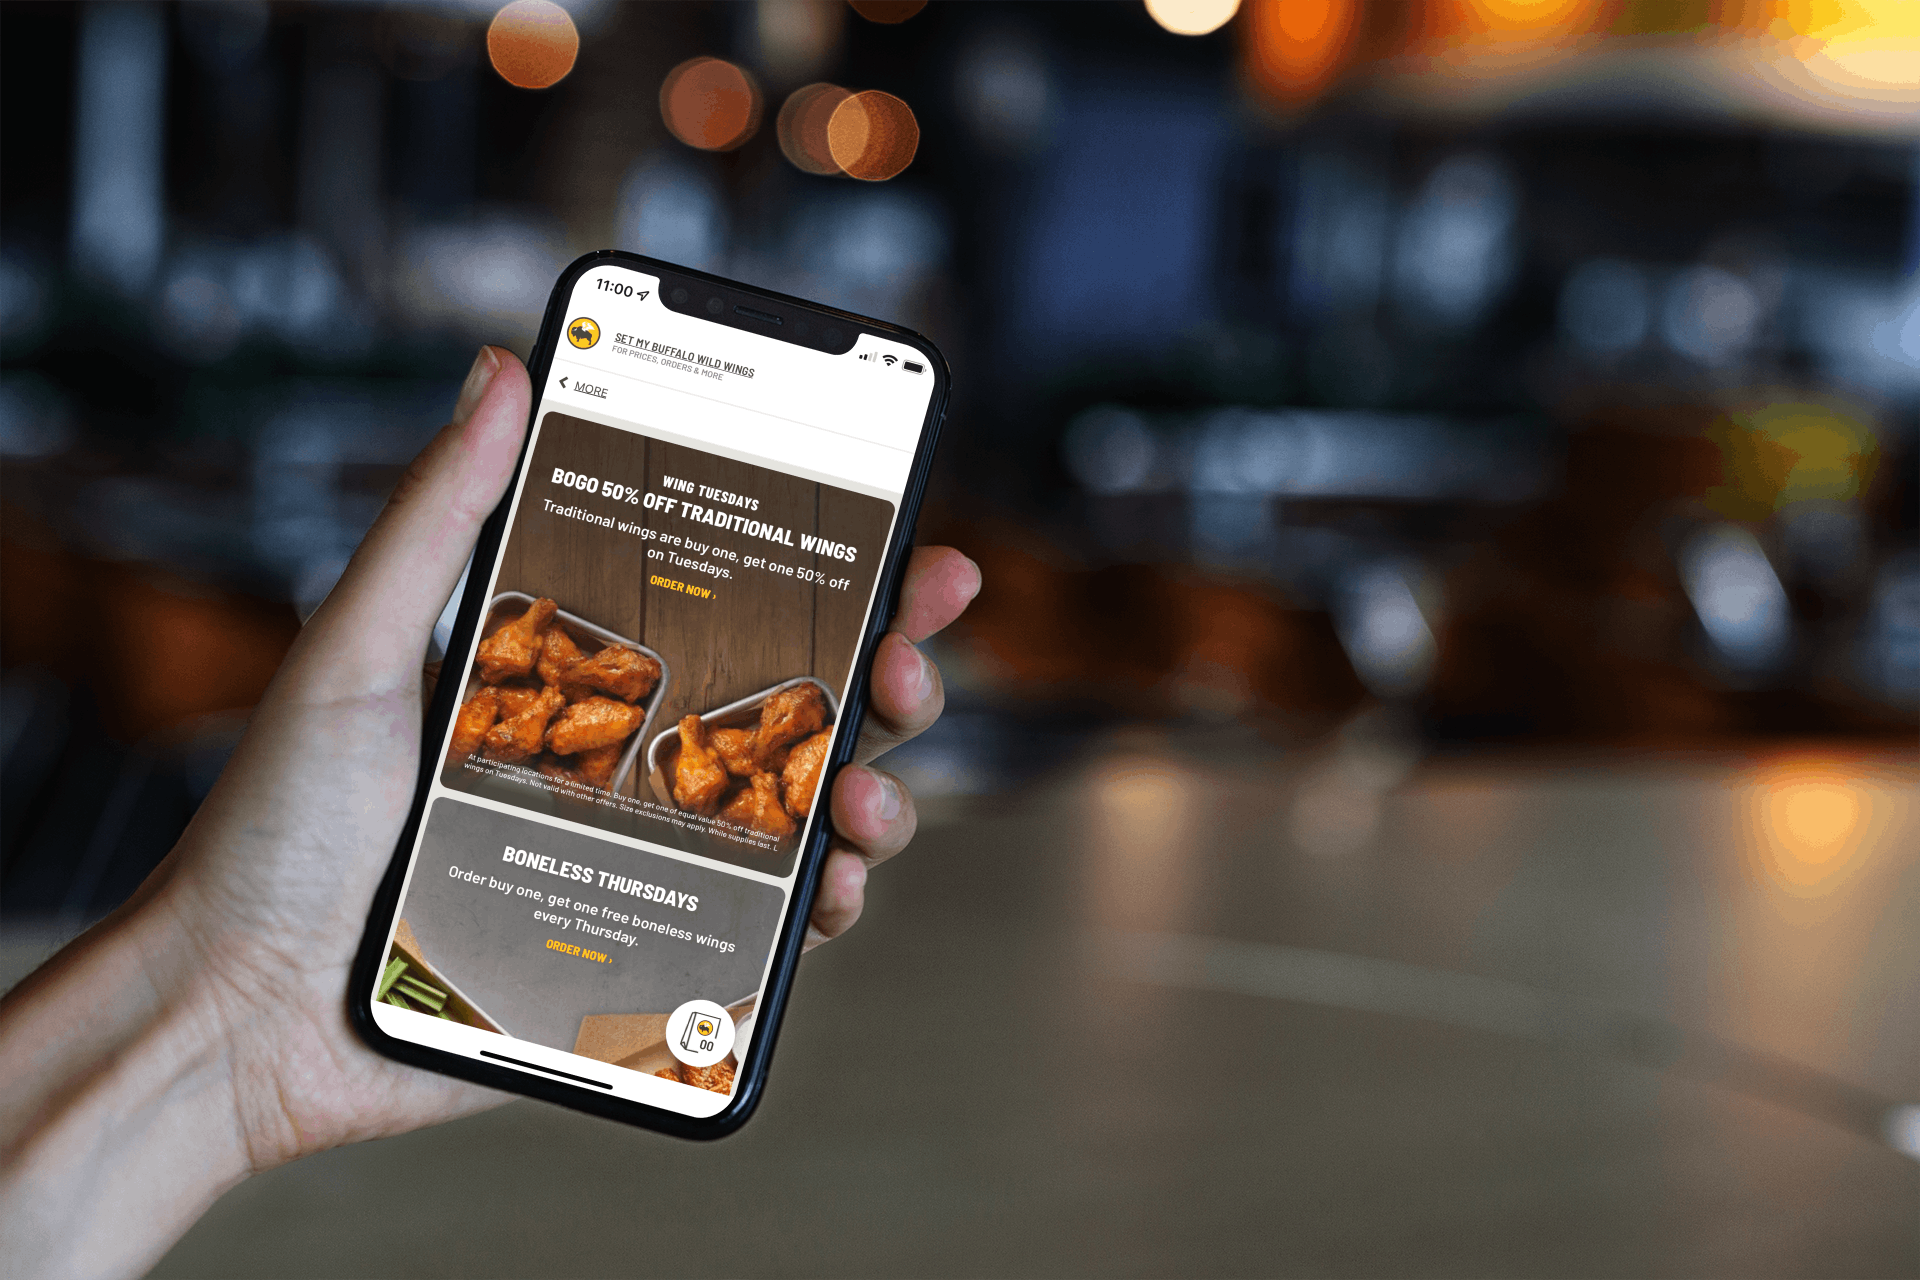 A person holding their iPhone up showing the Buffalo Wild Wings app open to the promotional page.